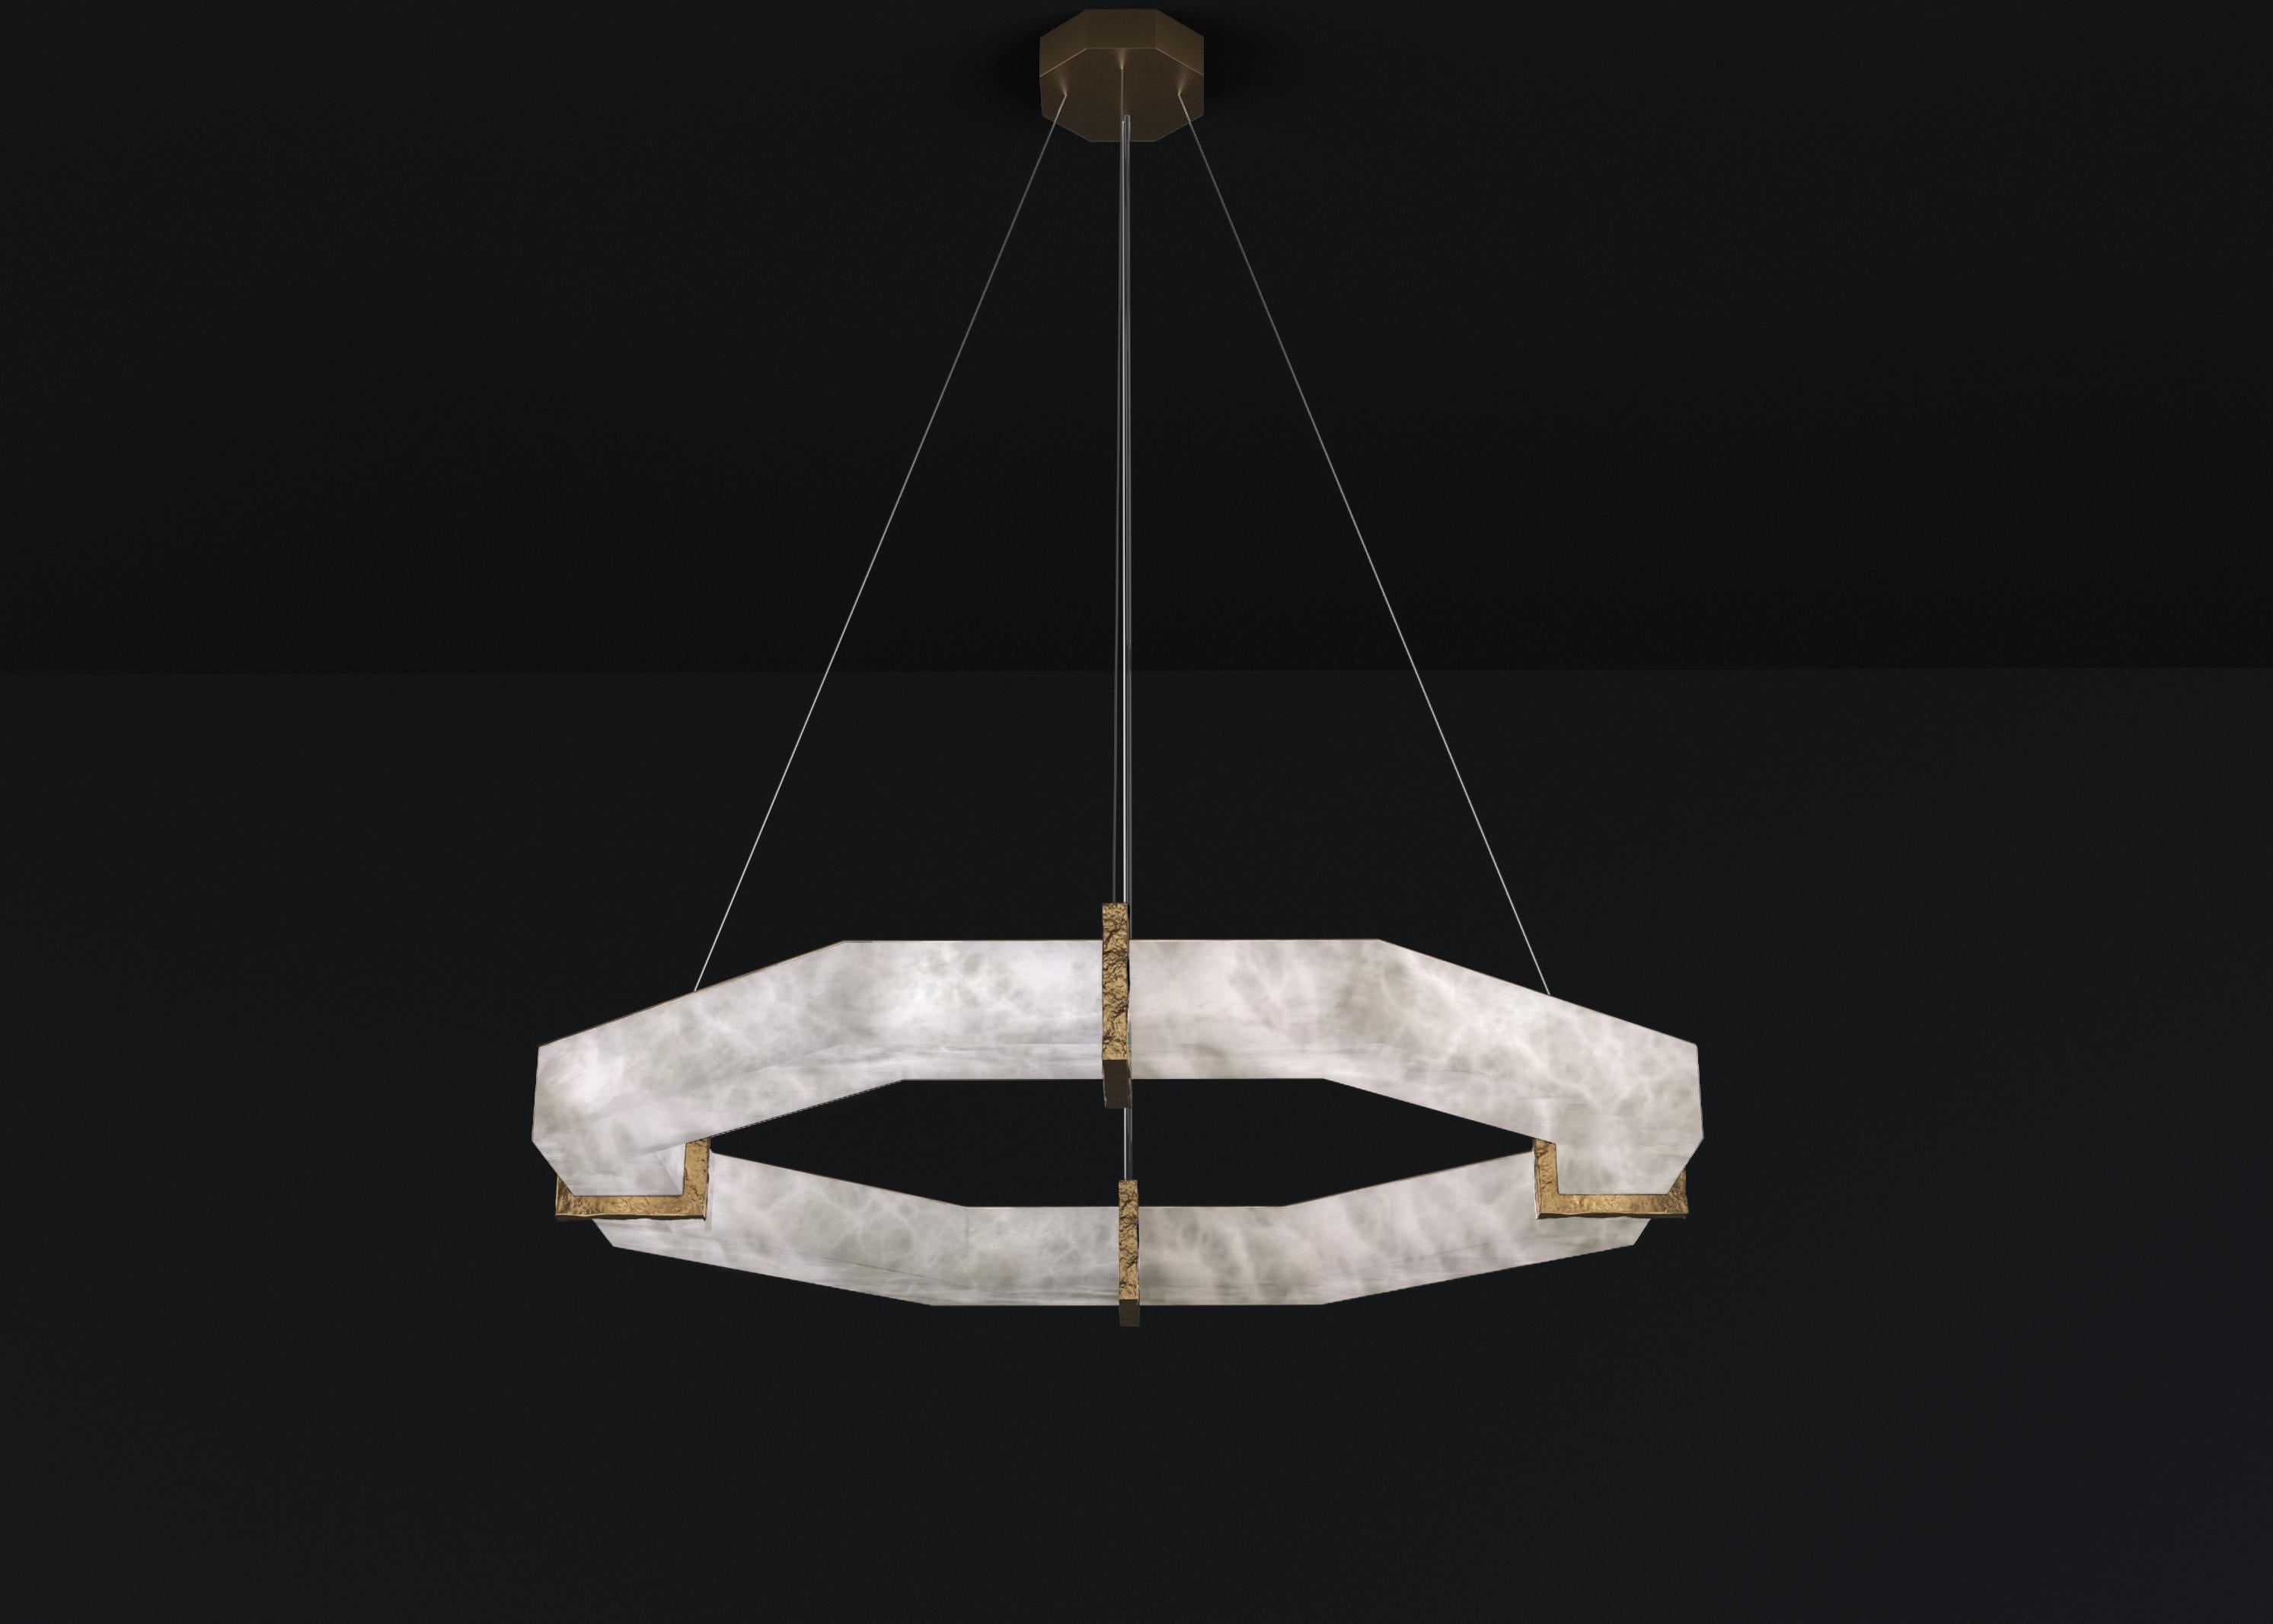 Efesto Bronze Pendant Lamp by Alabastro Italiano
Dimensions: D 83 x W 80 x H 11 cm.
Materials: White alabaster and bronze.

Available in different finishes: Shiny Silver, Bronze, Brushed Brass, Ruggine of Florence, Brushed Burnished, Shiny Gold,